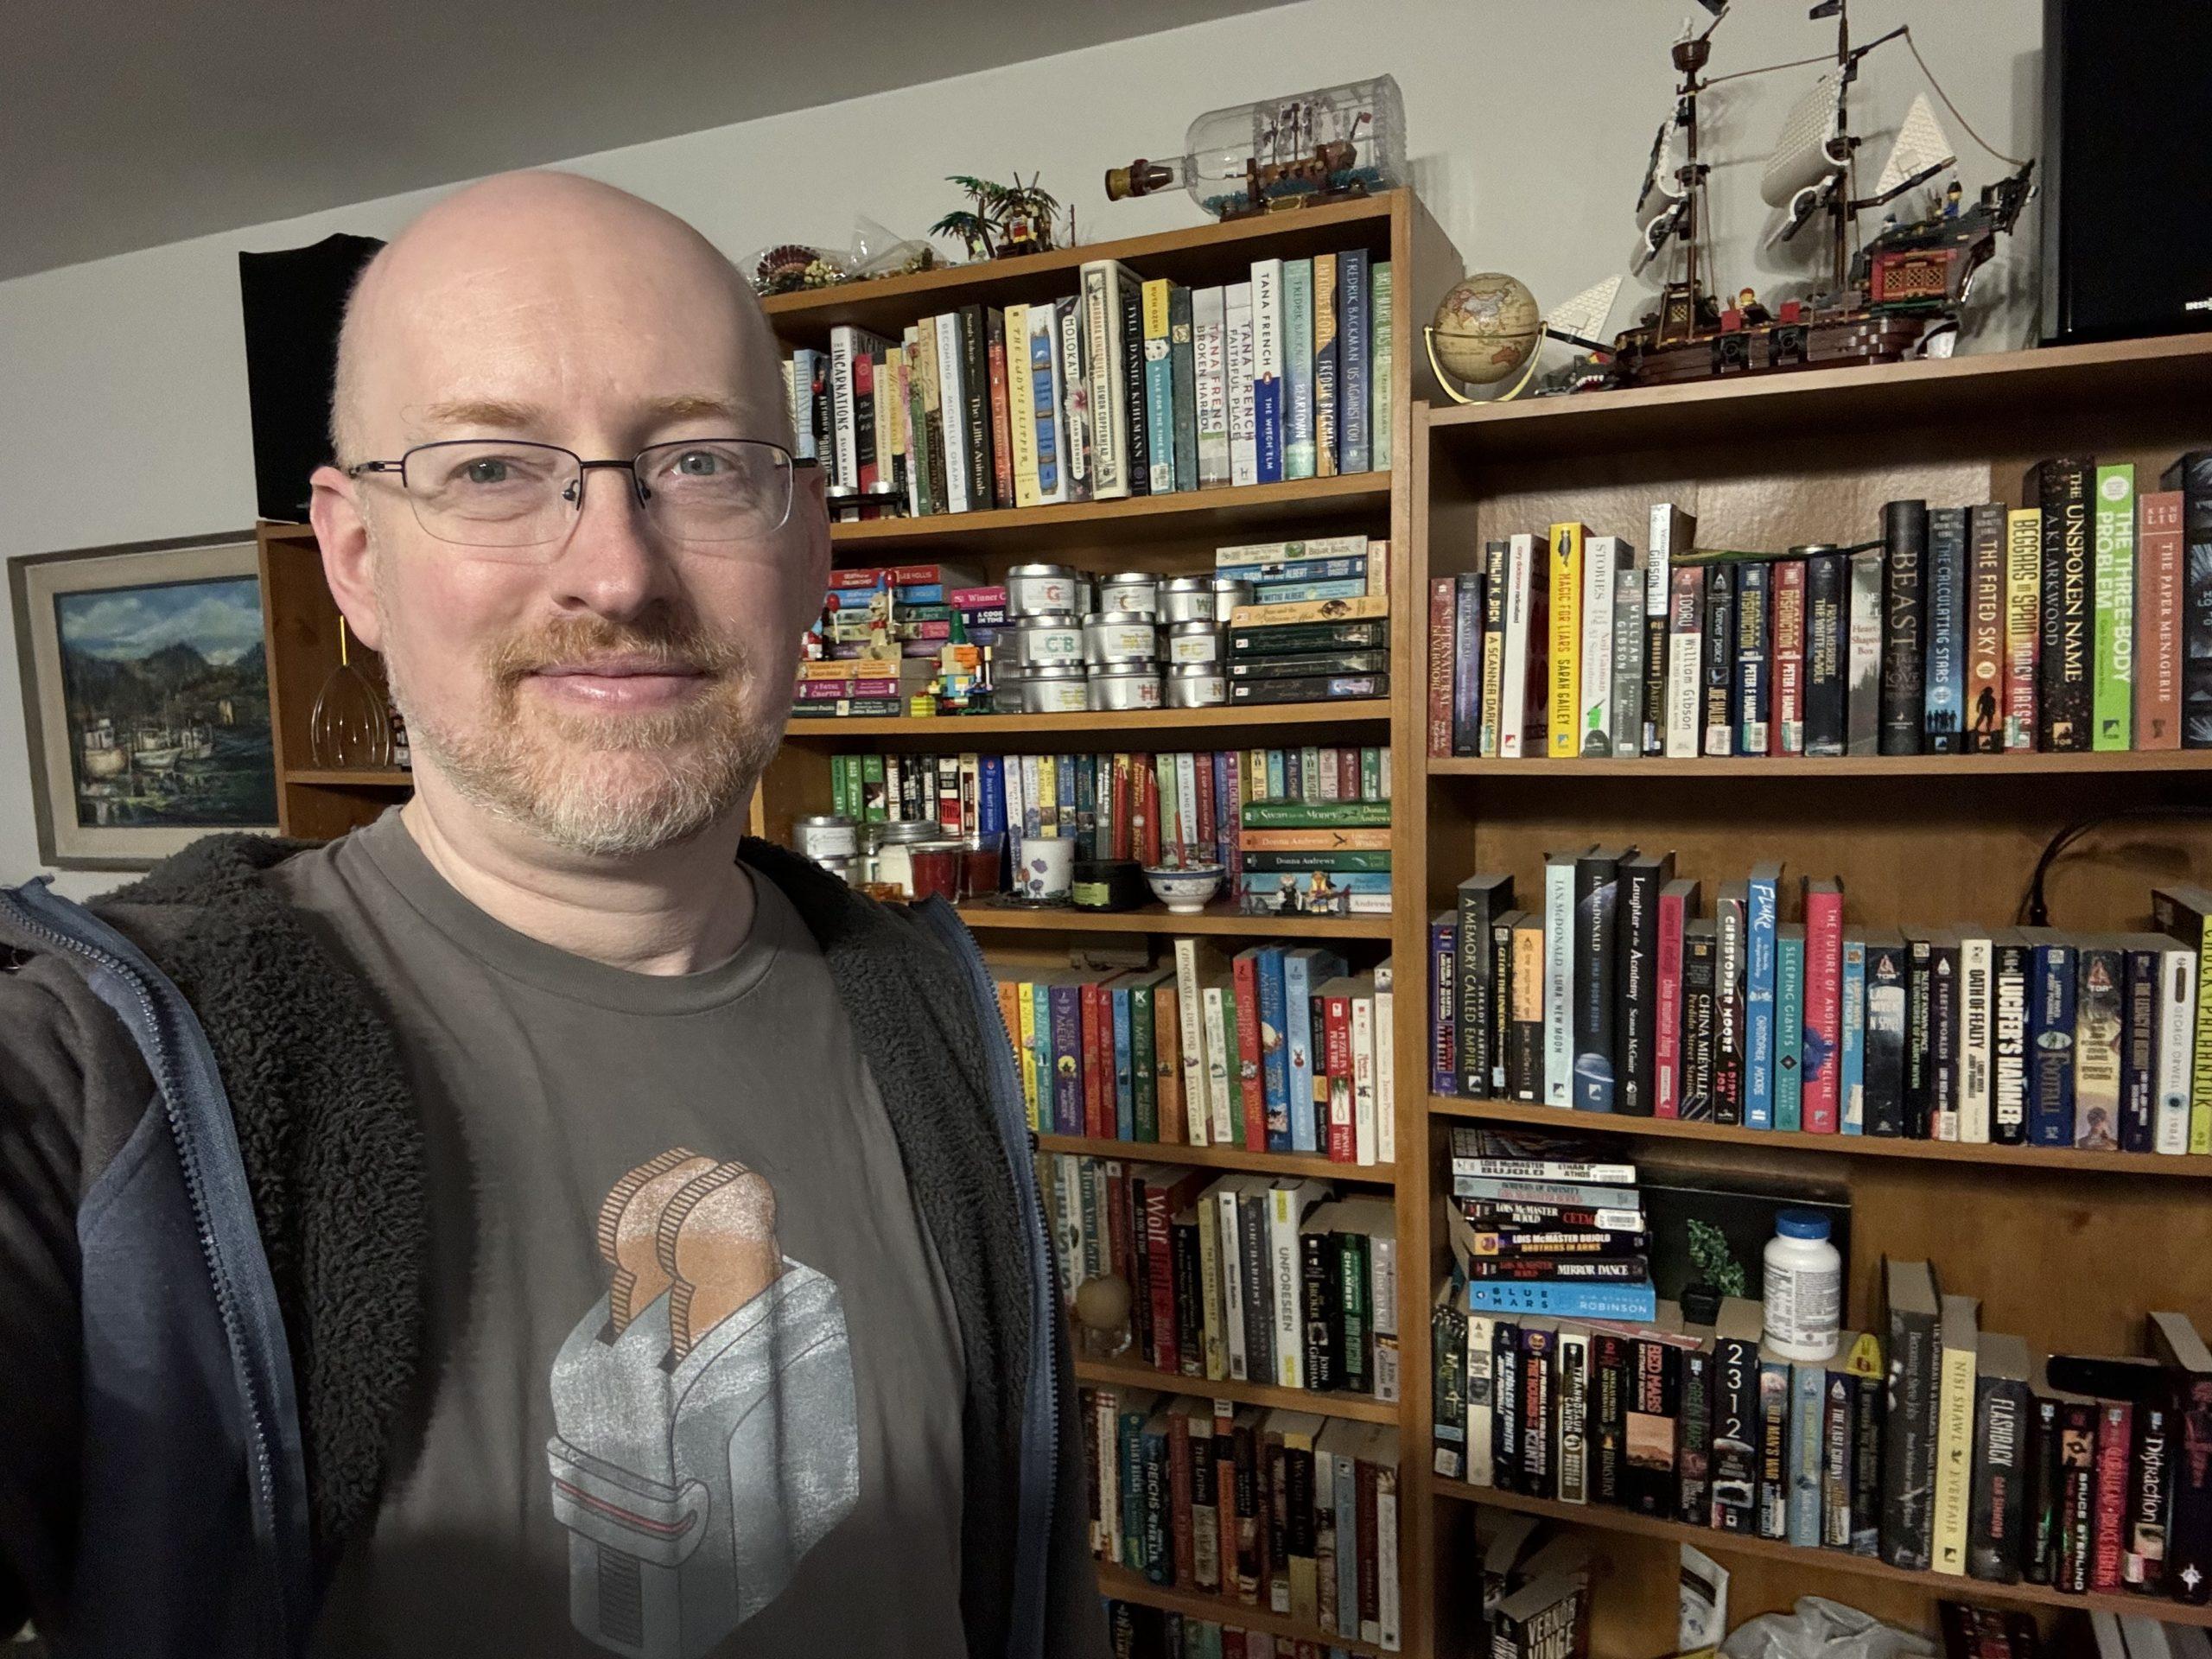 Me standing in front of a couple bookcases filled with books. A Lego sailing ship and ship-in-a-bottle are on display on top of the shelves.